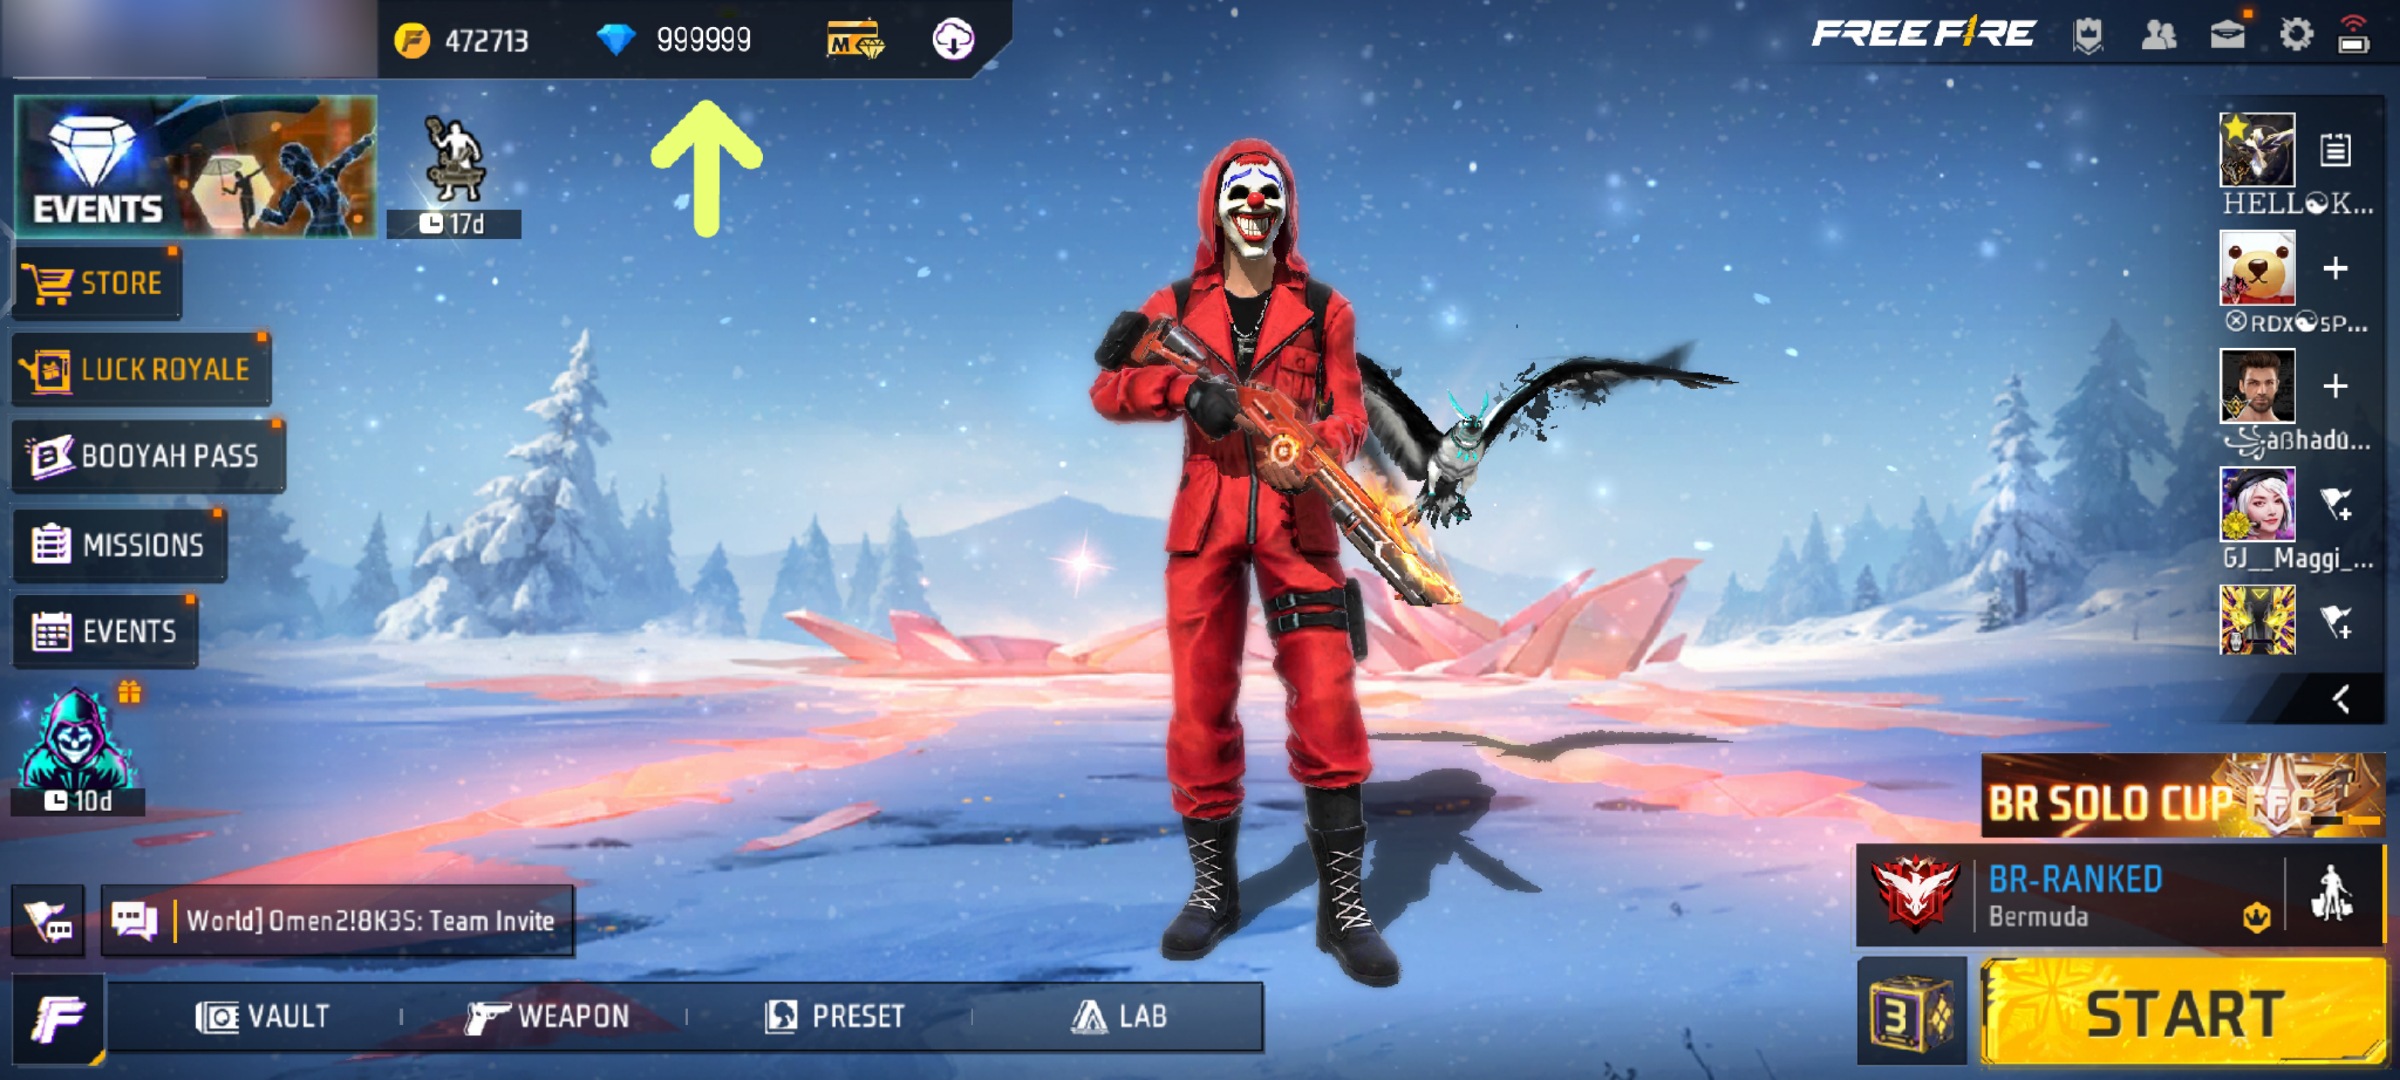 Free Fire Max Diamond Hack: How To Get Unlimited Diamonds For Free?